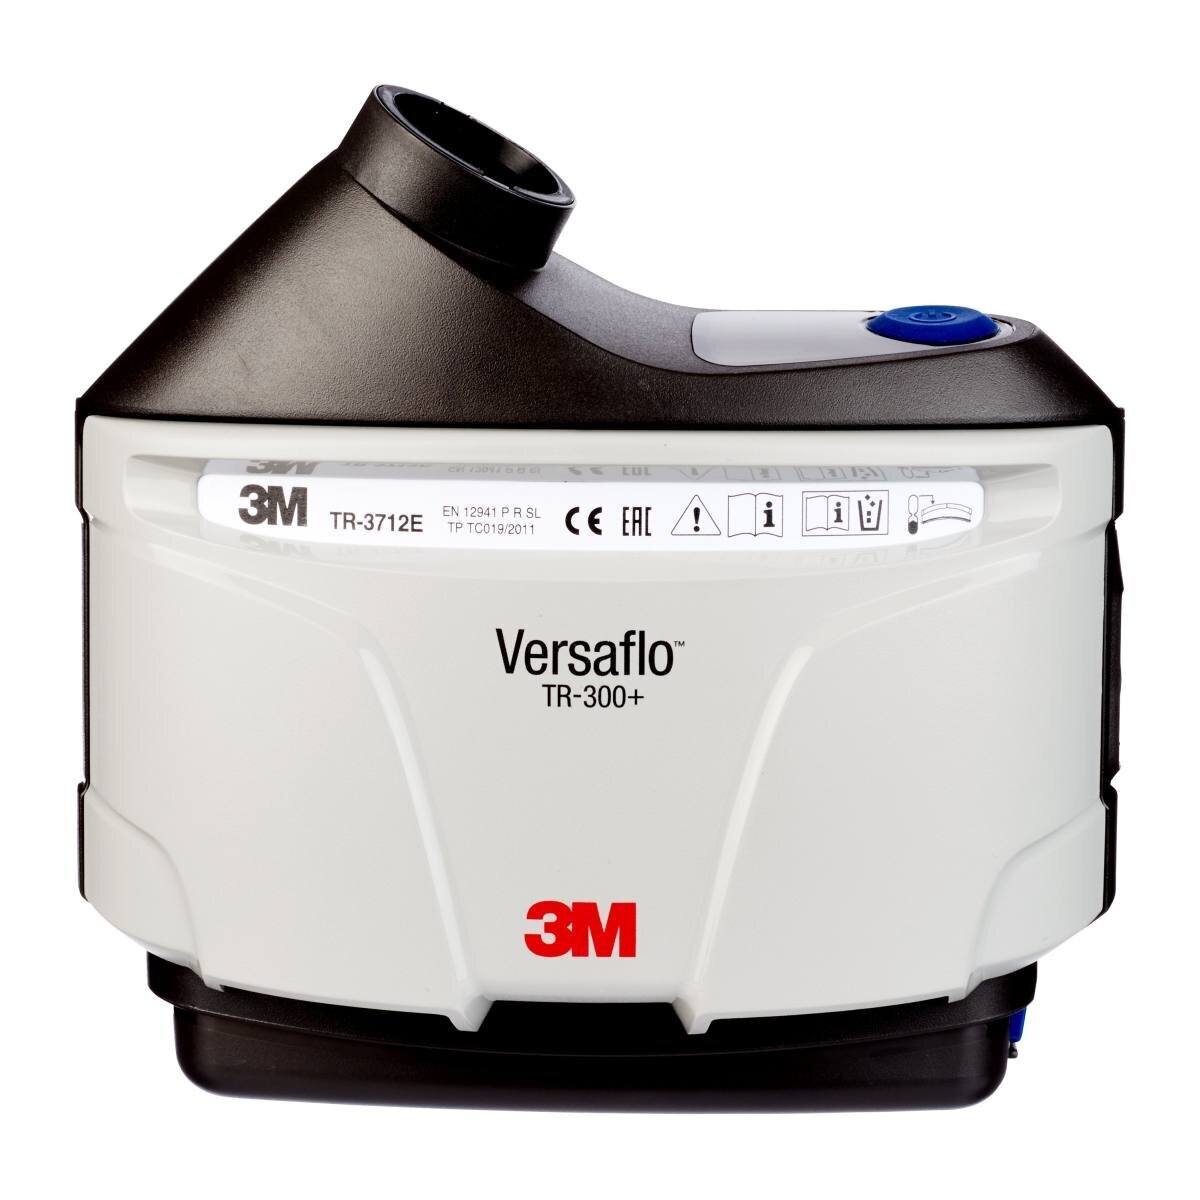 3M Versaflo TR-302E+ blower unit with filter cover &amp; airflow indicator